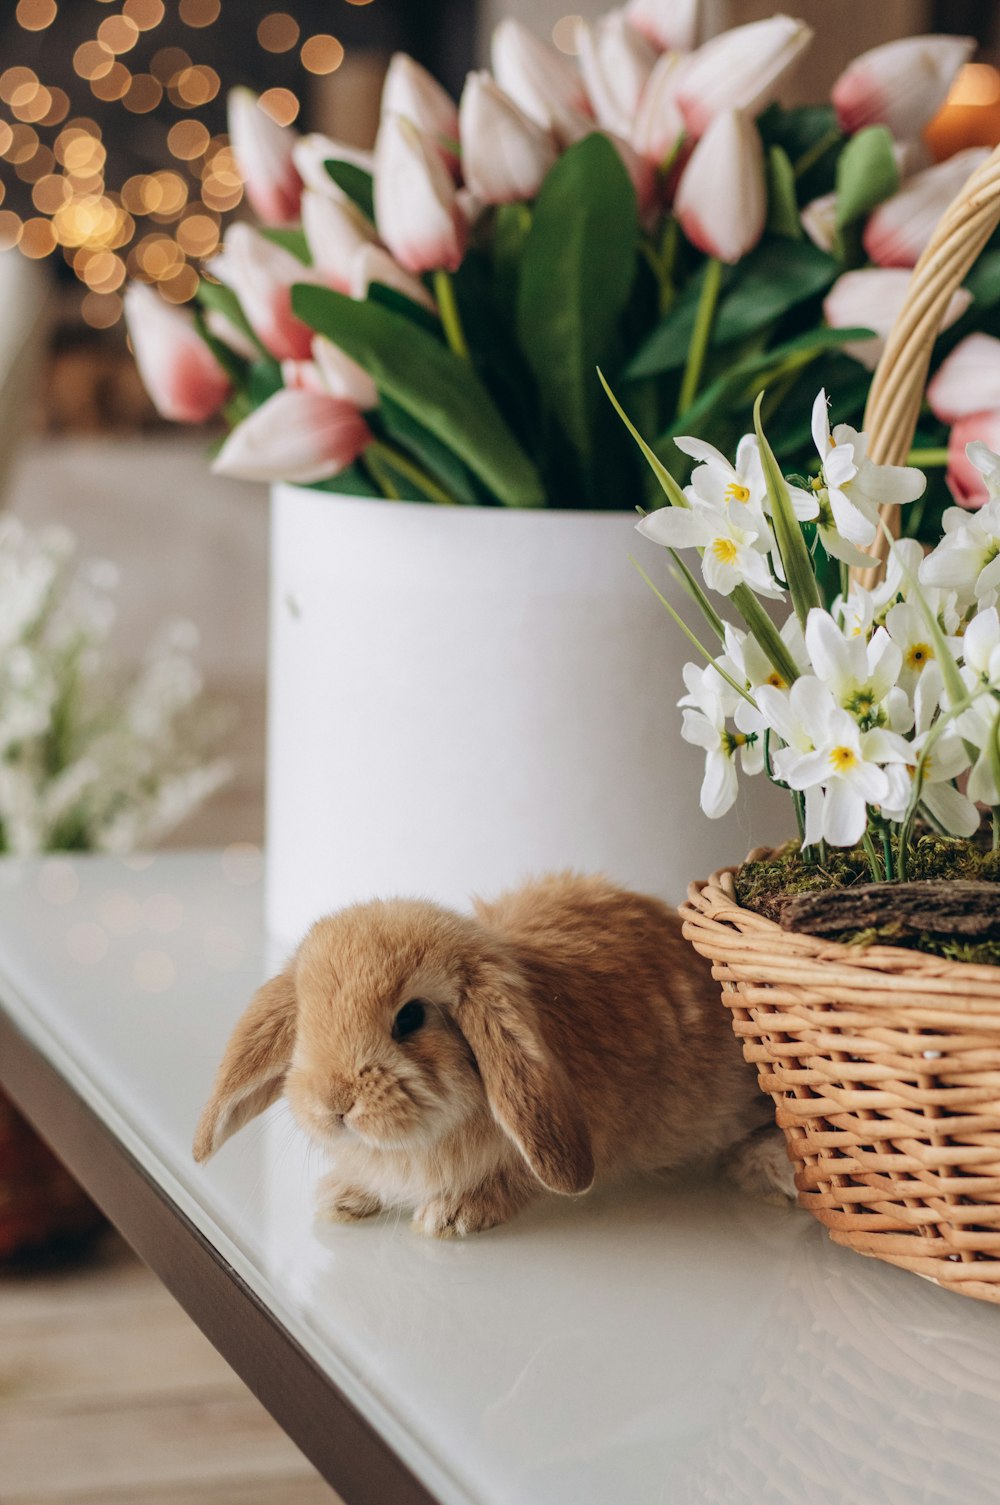 a small rabbit sitting on a table next to a basket of flowers